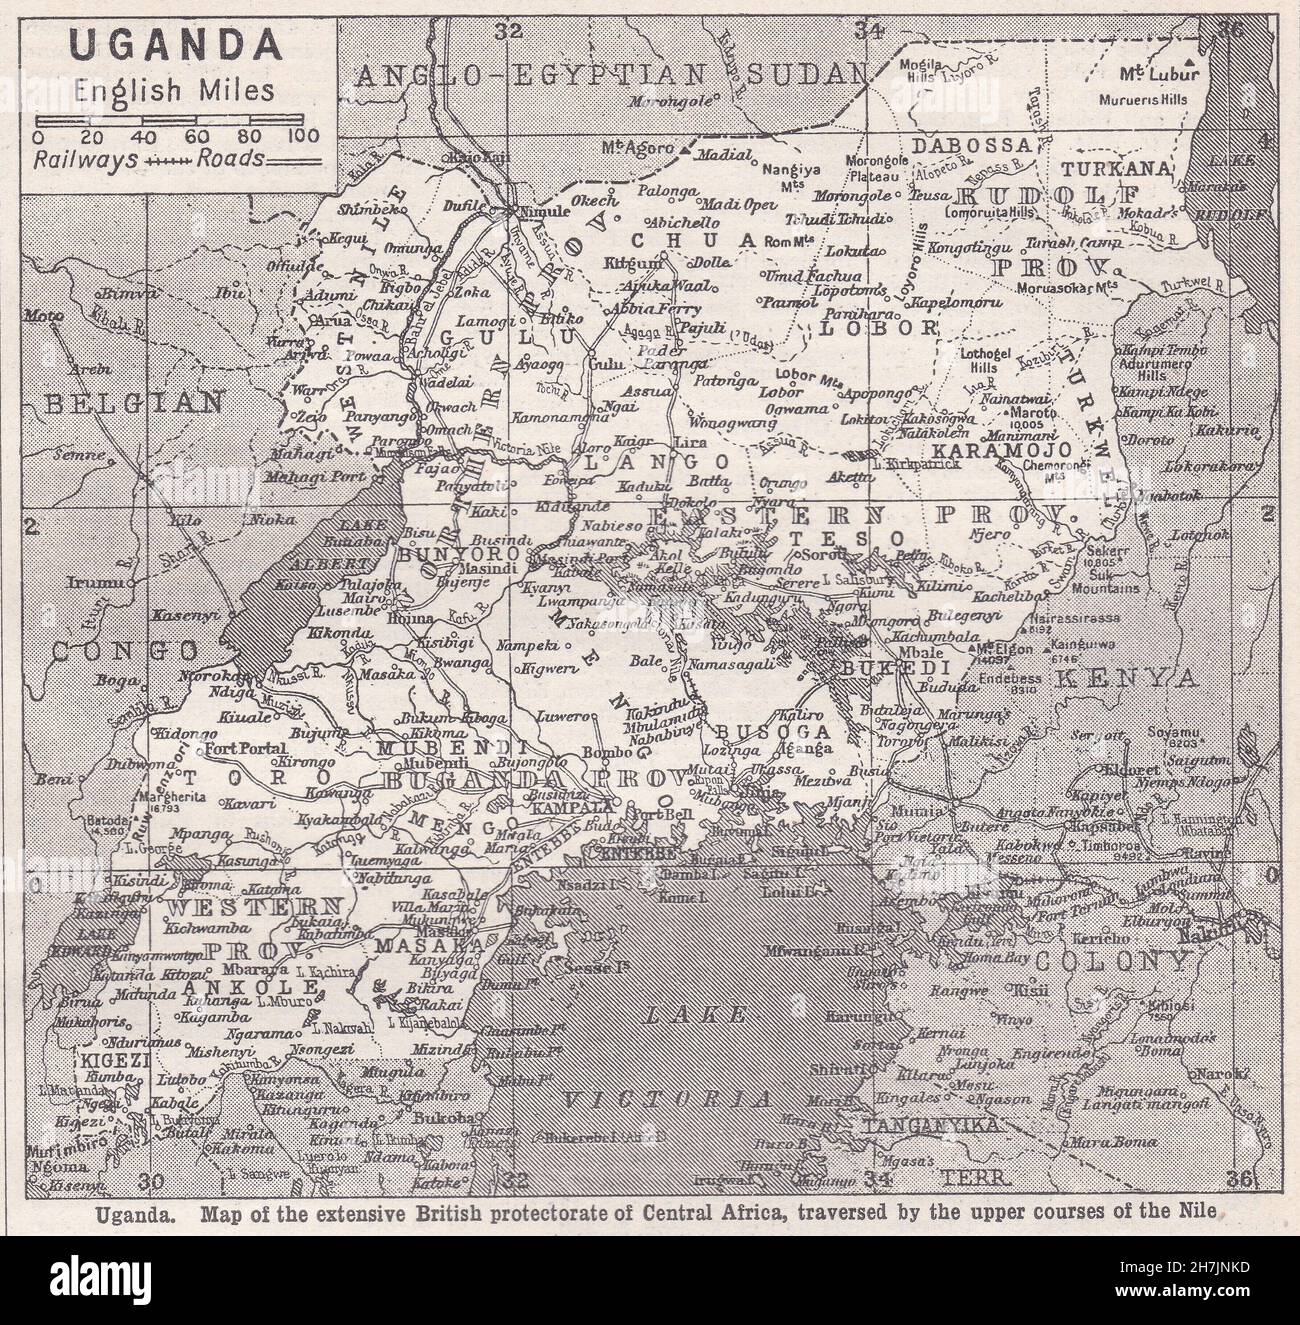 Vintage map of Uganda - showing extensive British protectorate of Central Africa, traversed by the upper courses of the Nile 1930s. Stock Photo